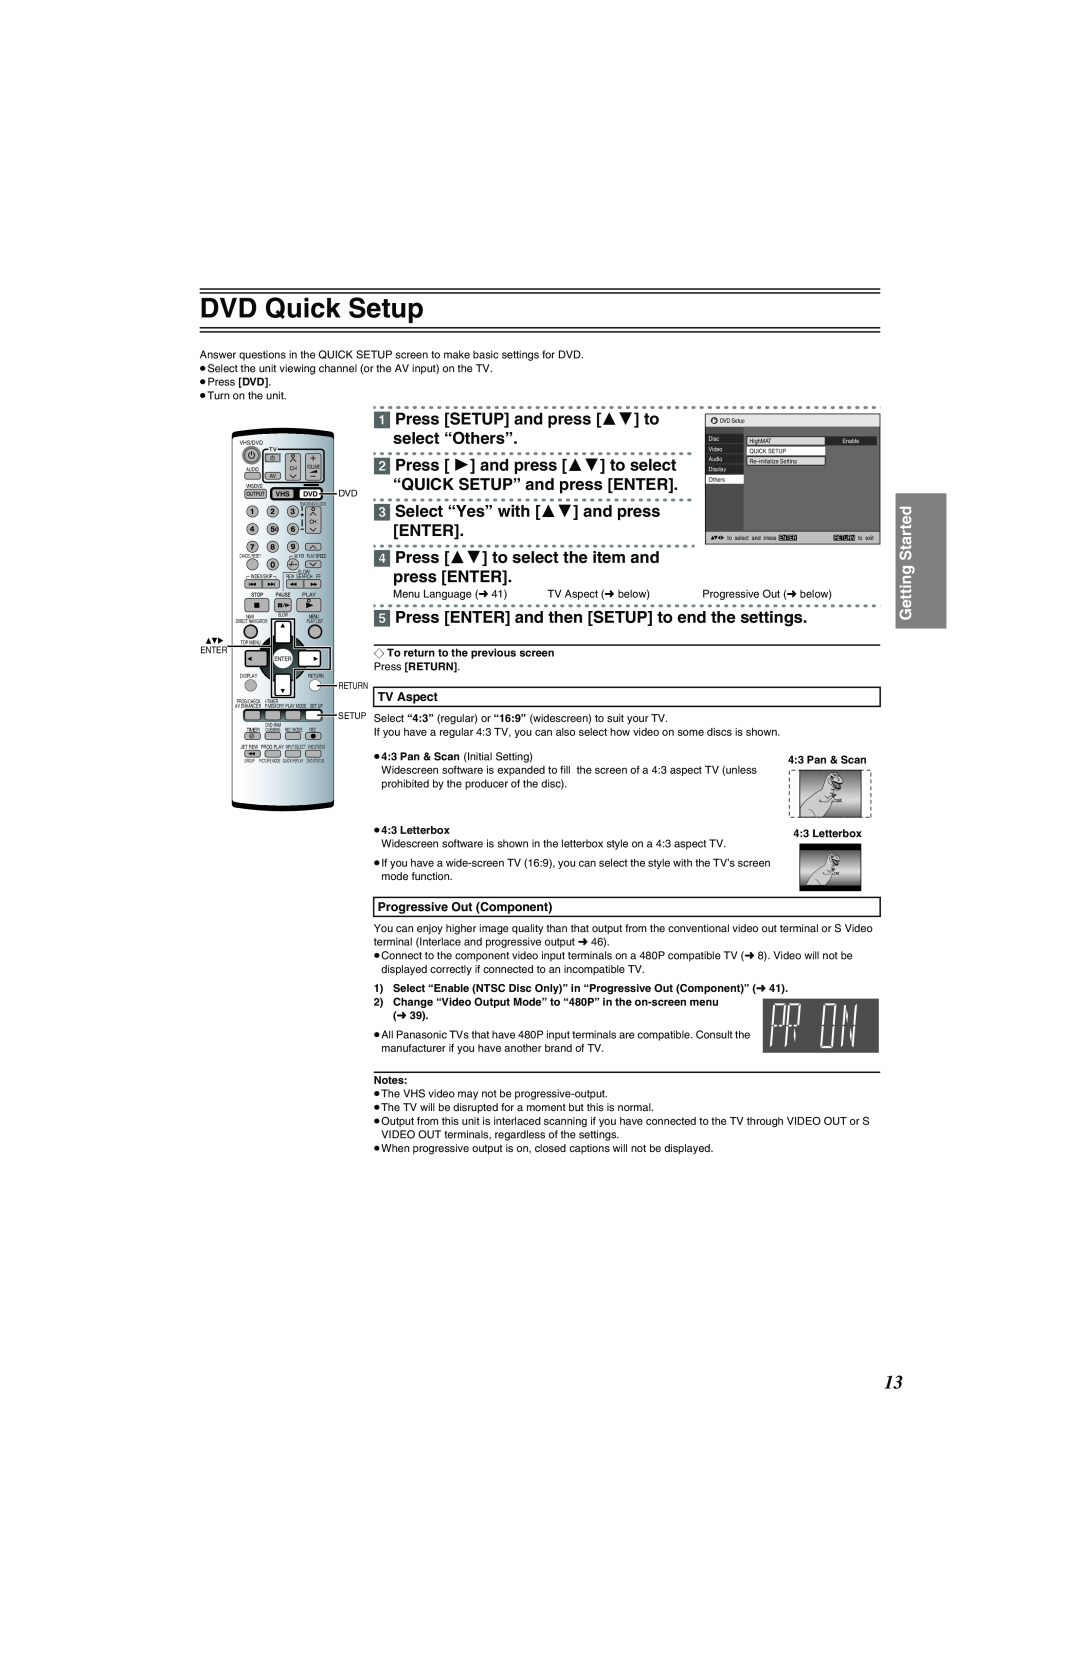 Panasonic NV-VP32 Series manual DVD Quick Setup, Press SETUP and press 34 to select “Others”, Started, ≥43 Letterbox 